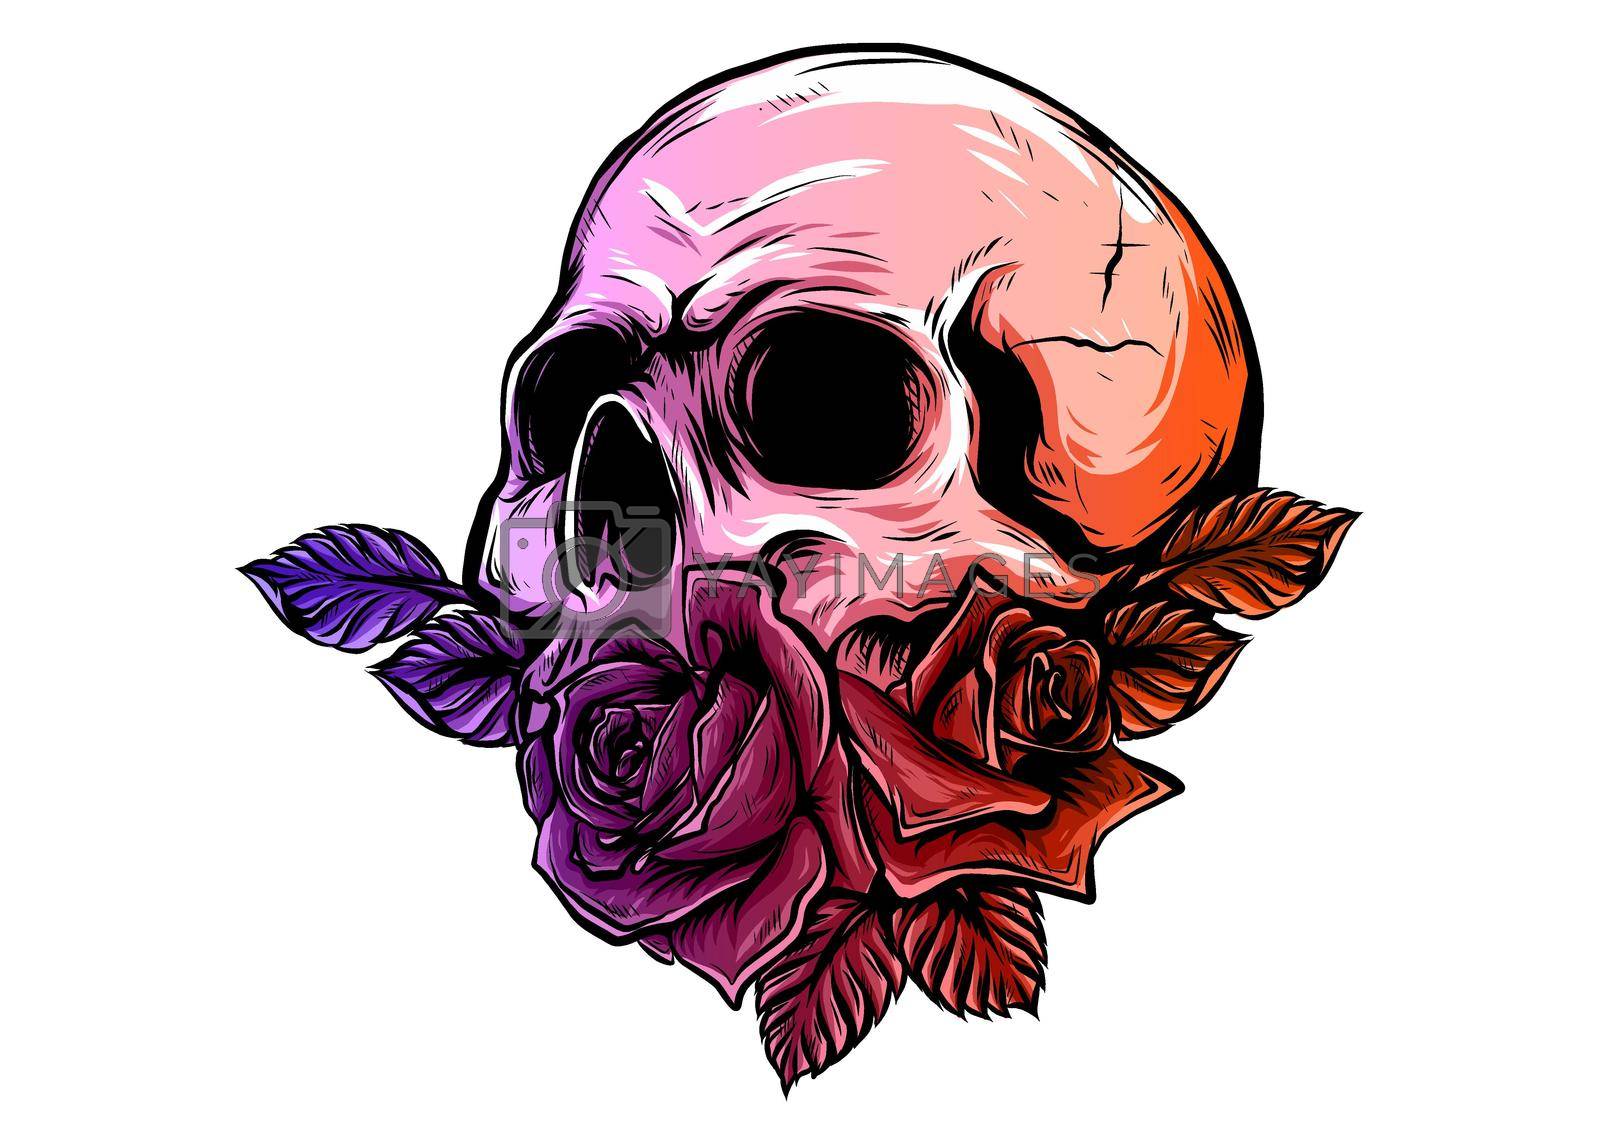 Royalty free image of A human skulls with roses on white background by dean